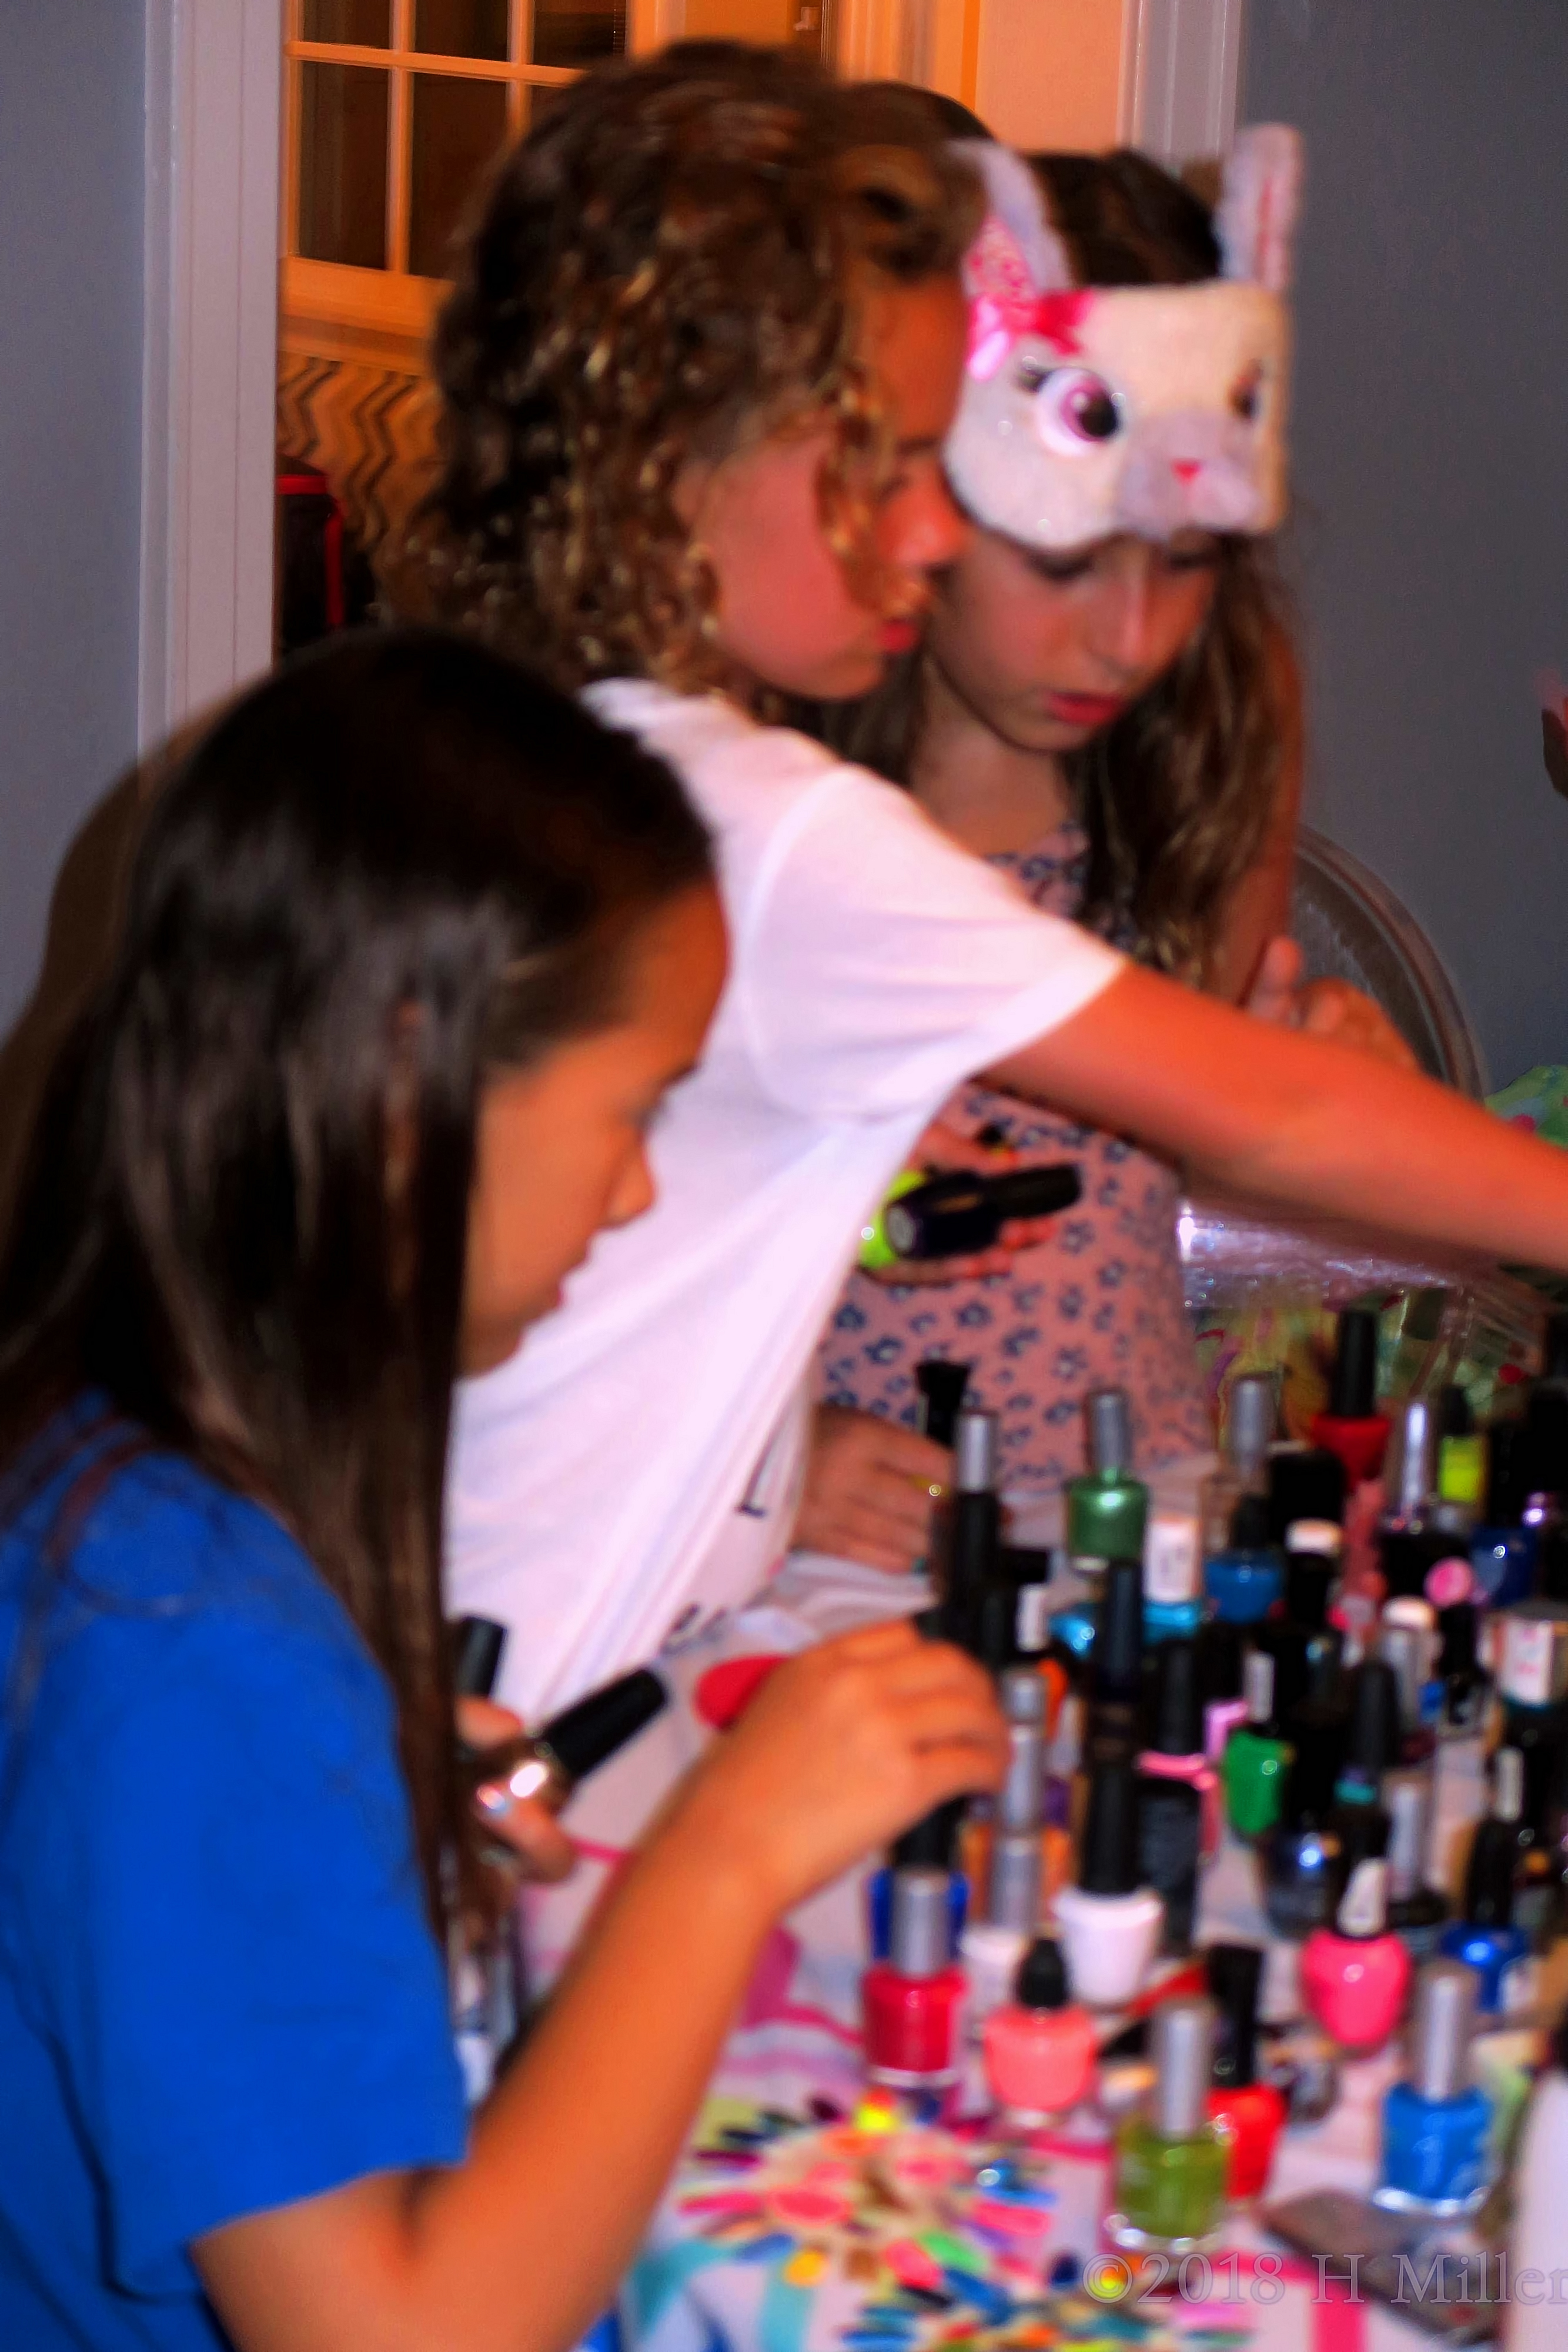 The Girls Take A Look At The Great Selection Of Nail Colors. 